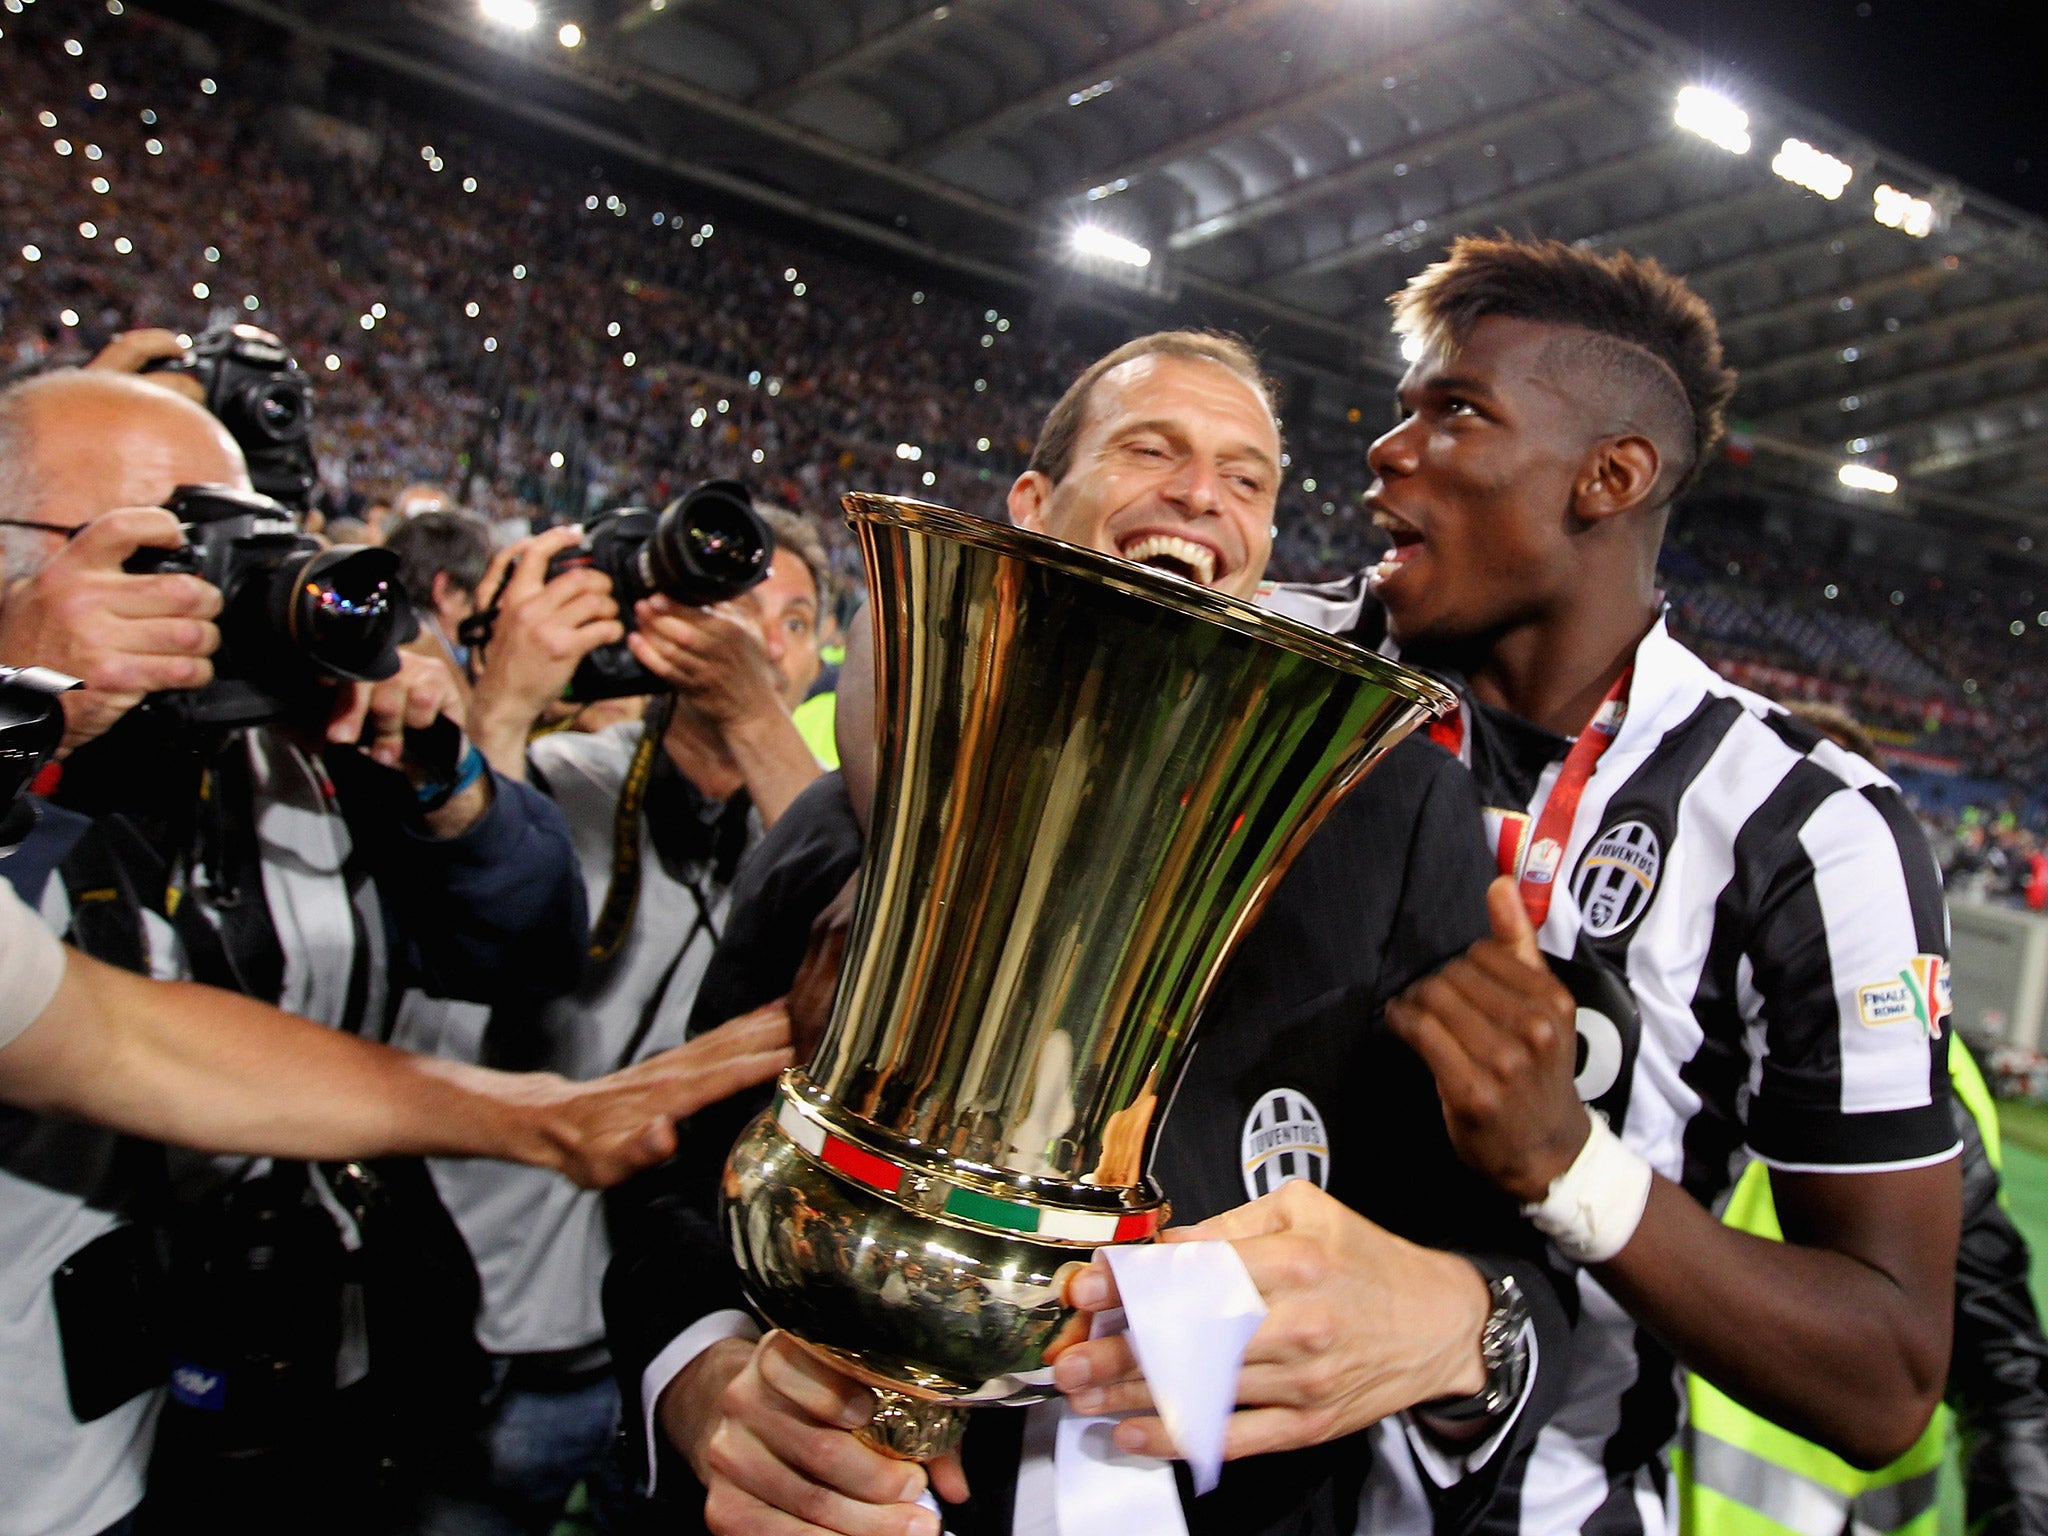 Paul Pogba has been told to report for Juventus pre-season training by manager Massmiliano Allegri